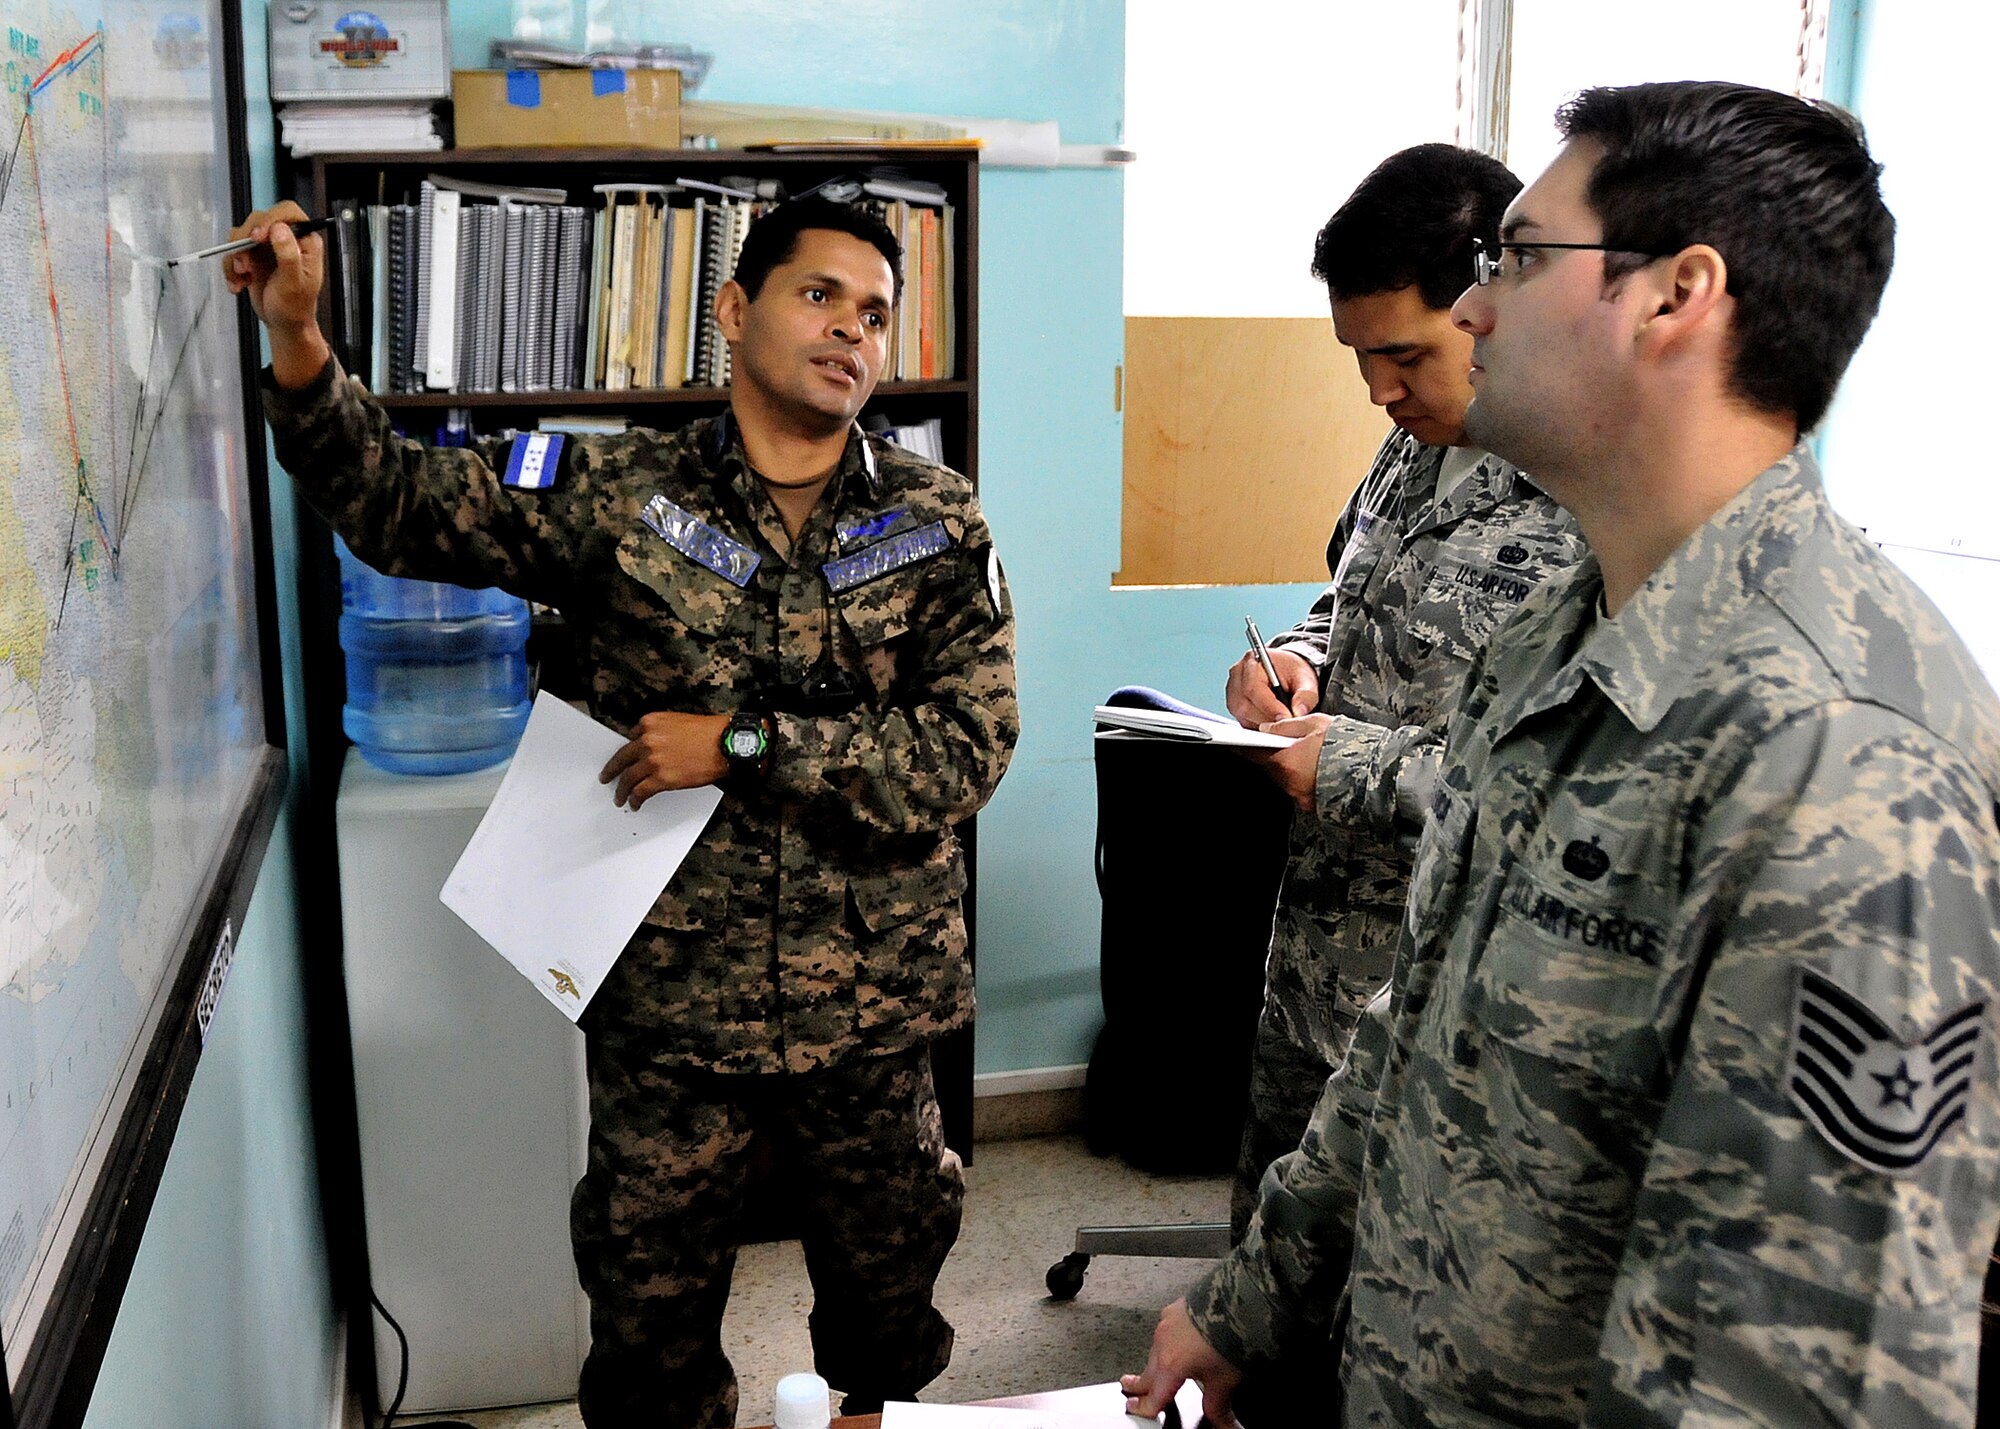 A Honduran Air Force communication technician shows Tech. Sgt. Claudio Winfree and Tech. Sgt. Brian De Luca, 571st Mobility Support Advisory Squadron air advisors, the location of all the FAH communications sites, at Col. Hernán Acosta Mejia Air Base, Tegucigalpa, Honduras, Feb. 7.  The MSAS Airmen, representing 15 Air Force specialties, are working side-by-side with Honduran Air Force members in developing seven core competencies to include air base defense, air traffic control, aircraft maintenance, aircrew survival, communications, generator maintenance and safety.  (U.S. Air Force photo by Tech. Sgt. Lesley Waters)